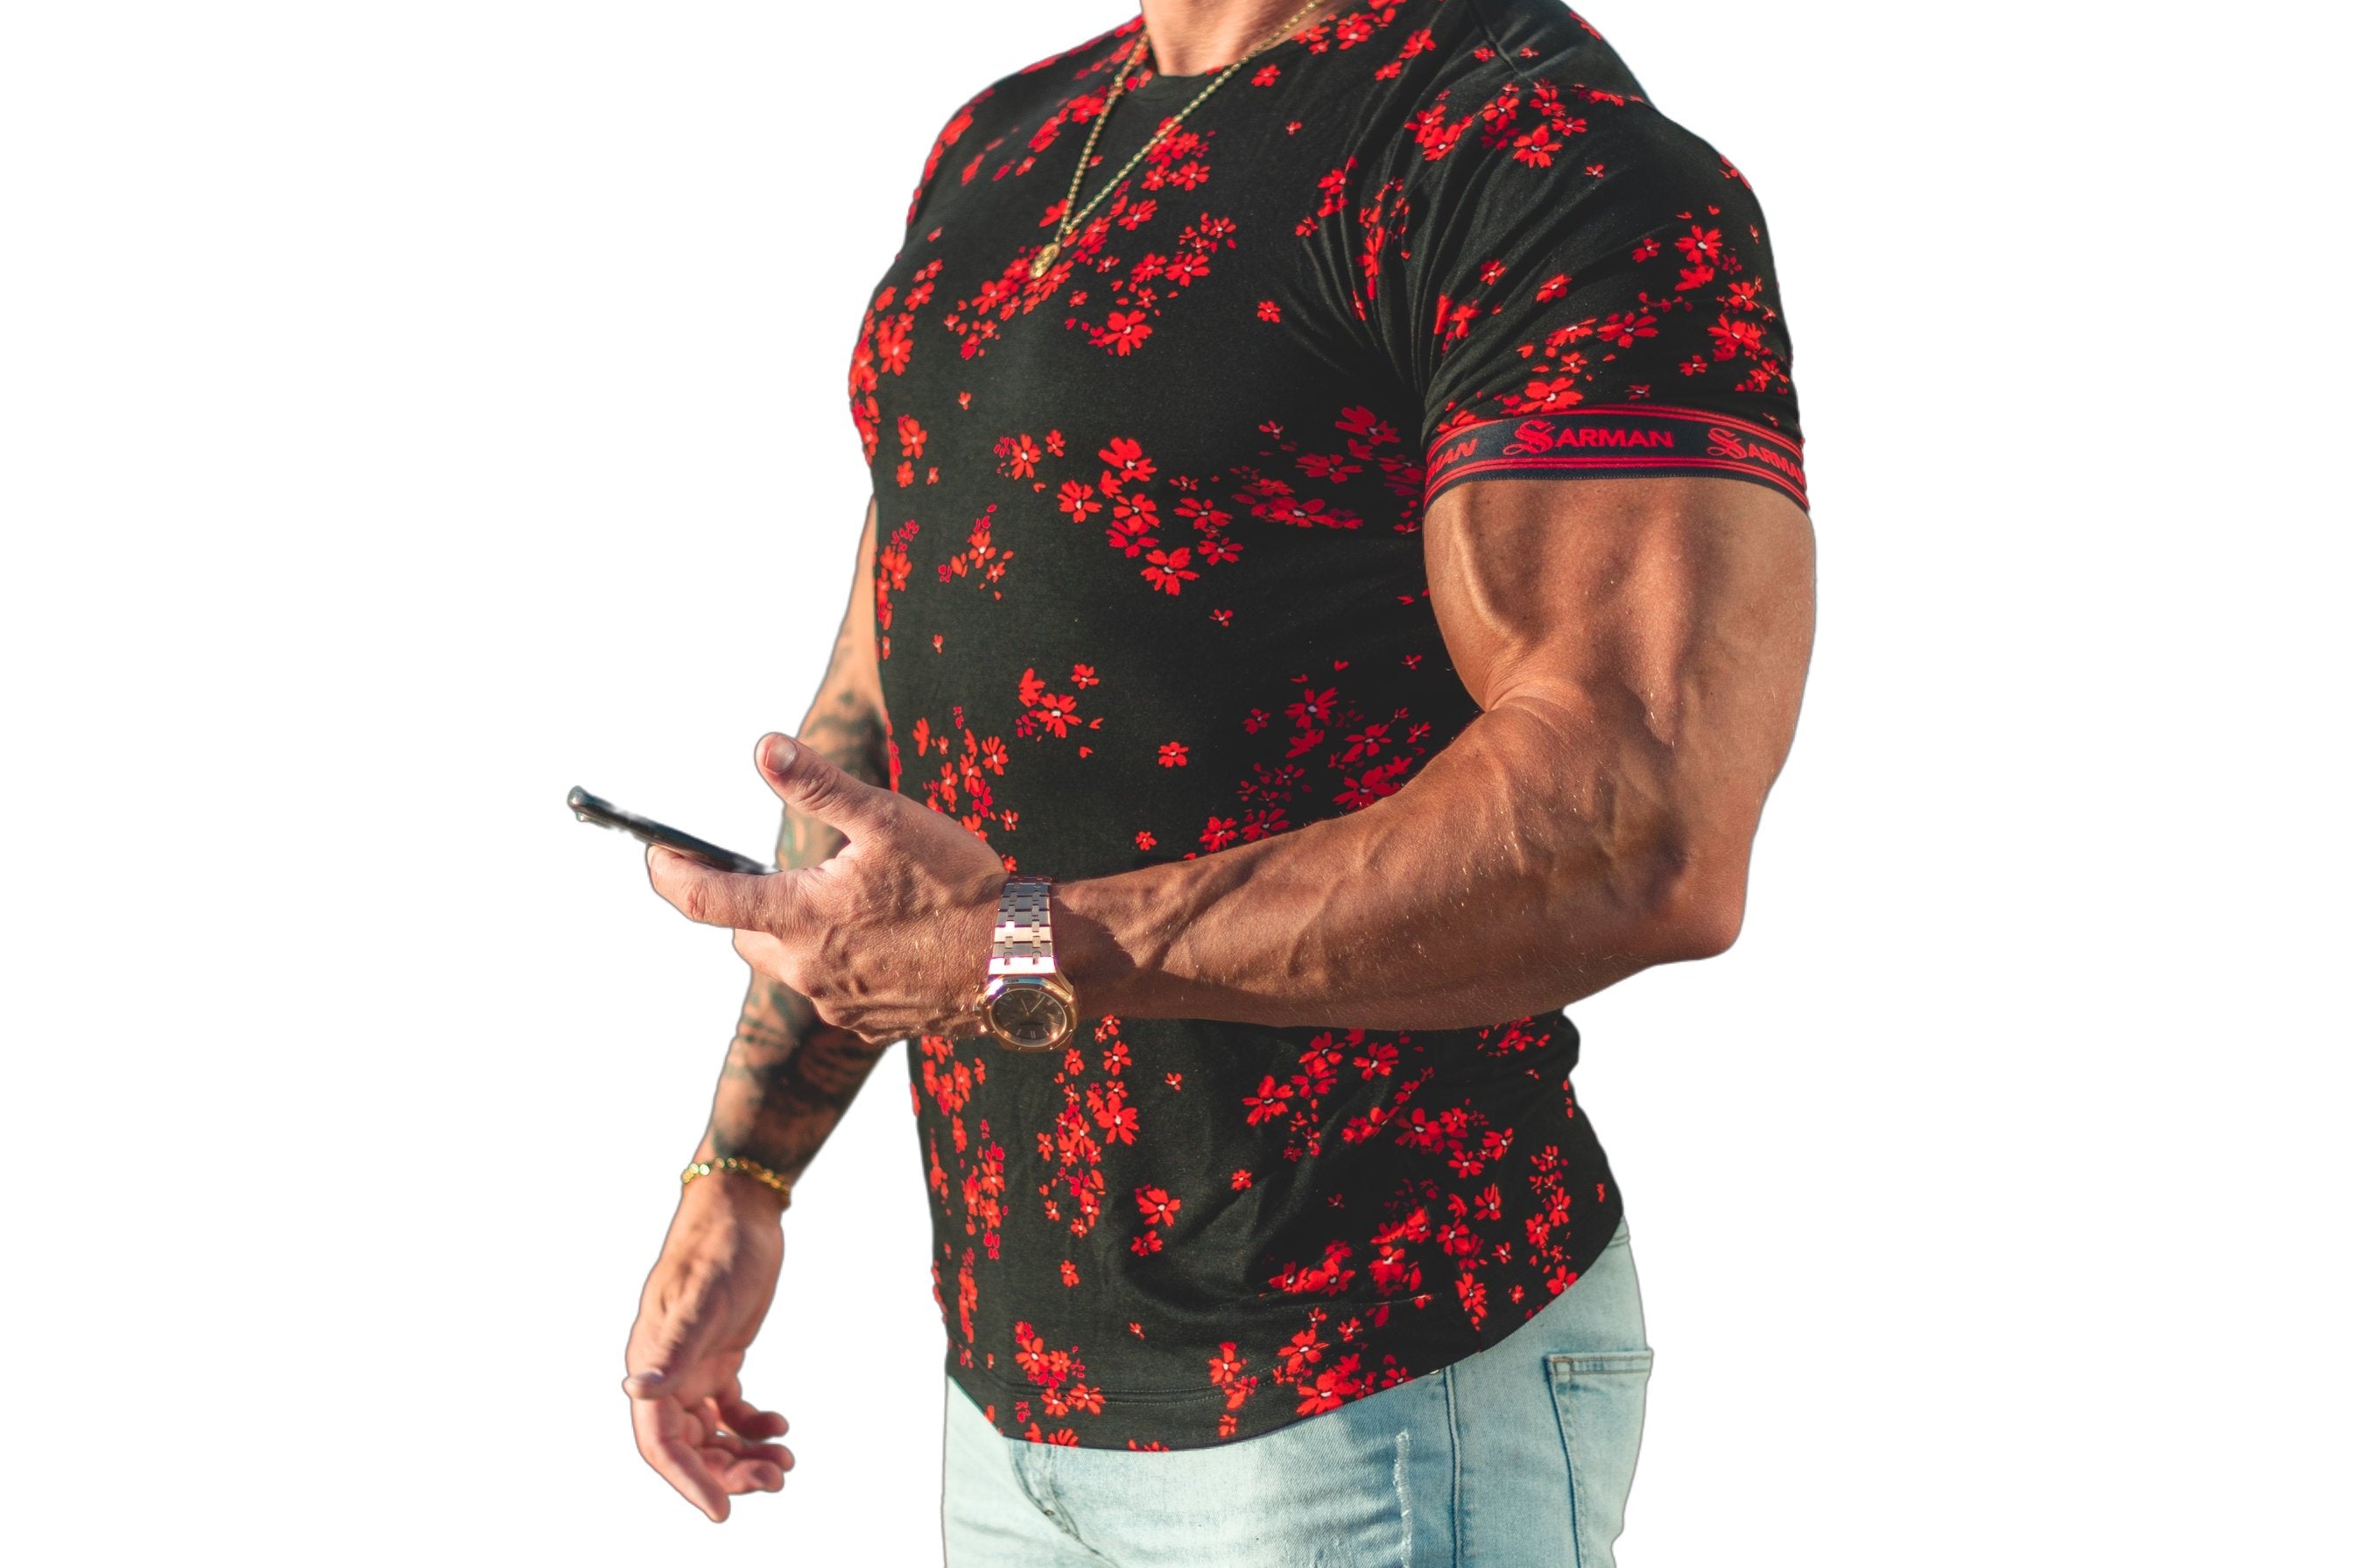 Anemone - Red T-shirt for Men - Sarman Fashion - Wholesale Clothing Fashion Brand for Men from Canada